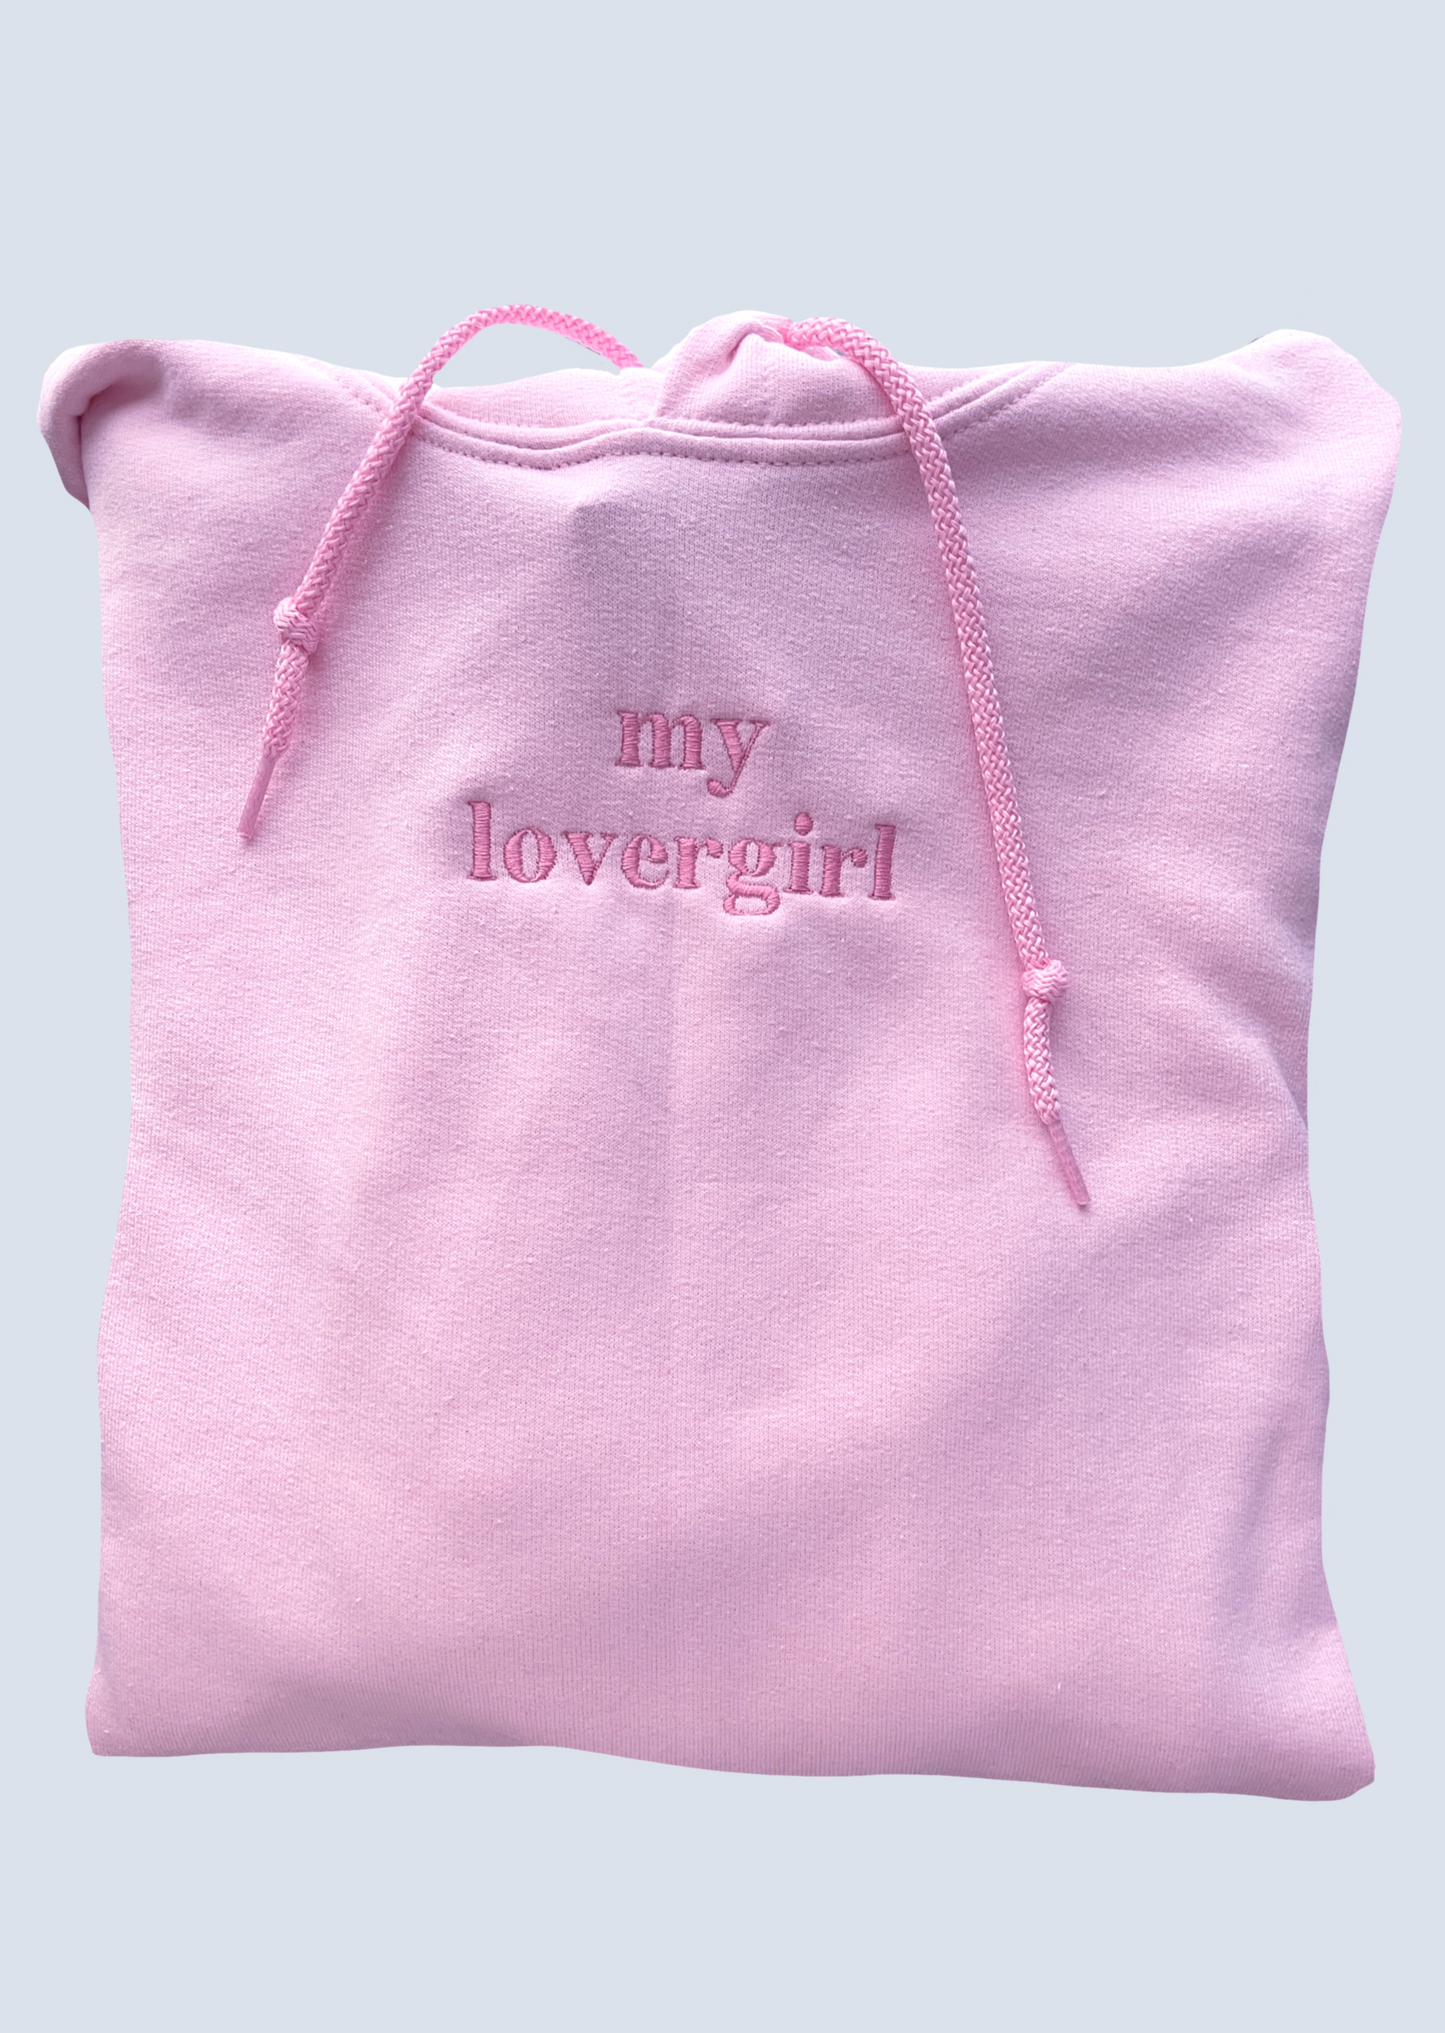 "My Lovergirl" Embroidery